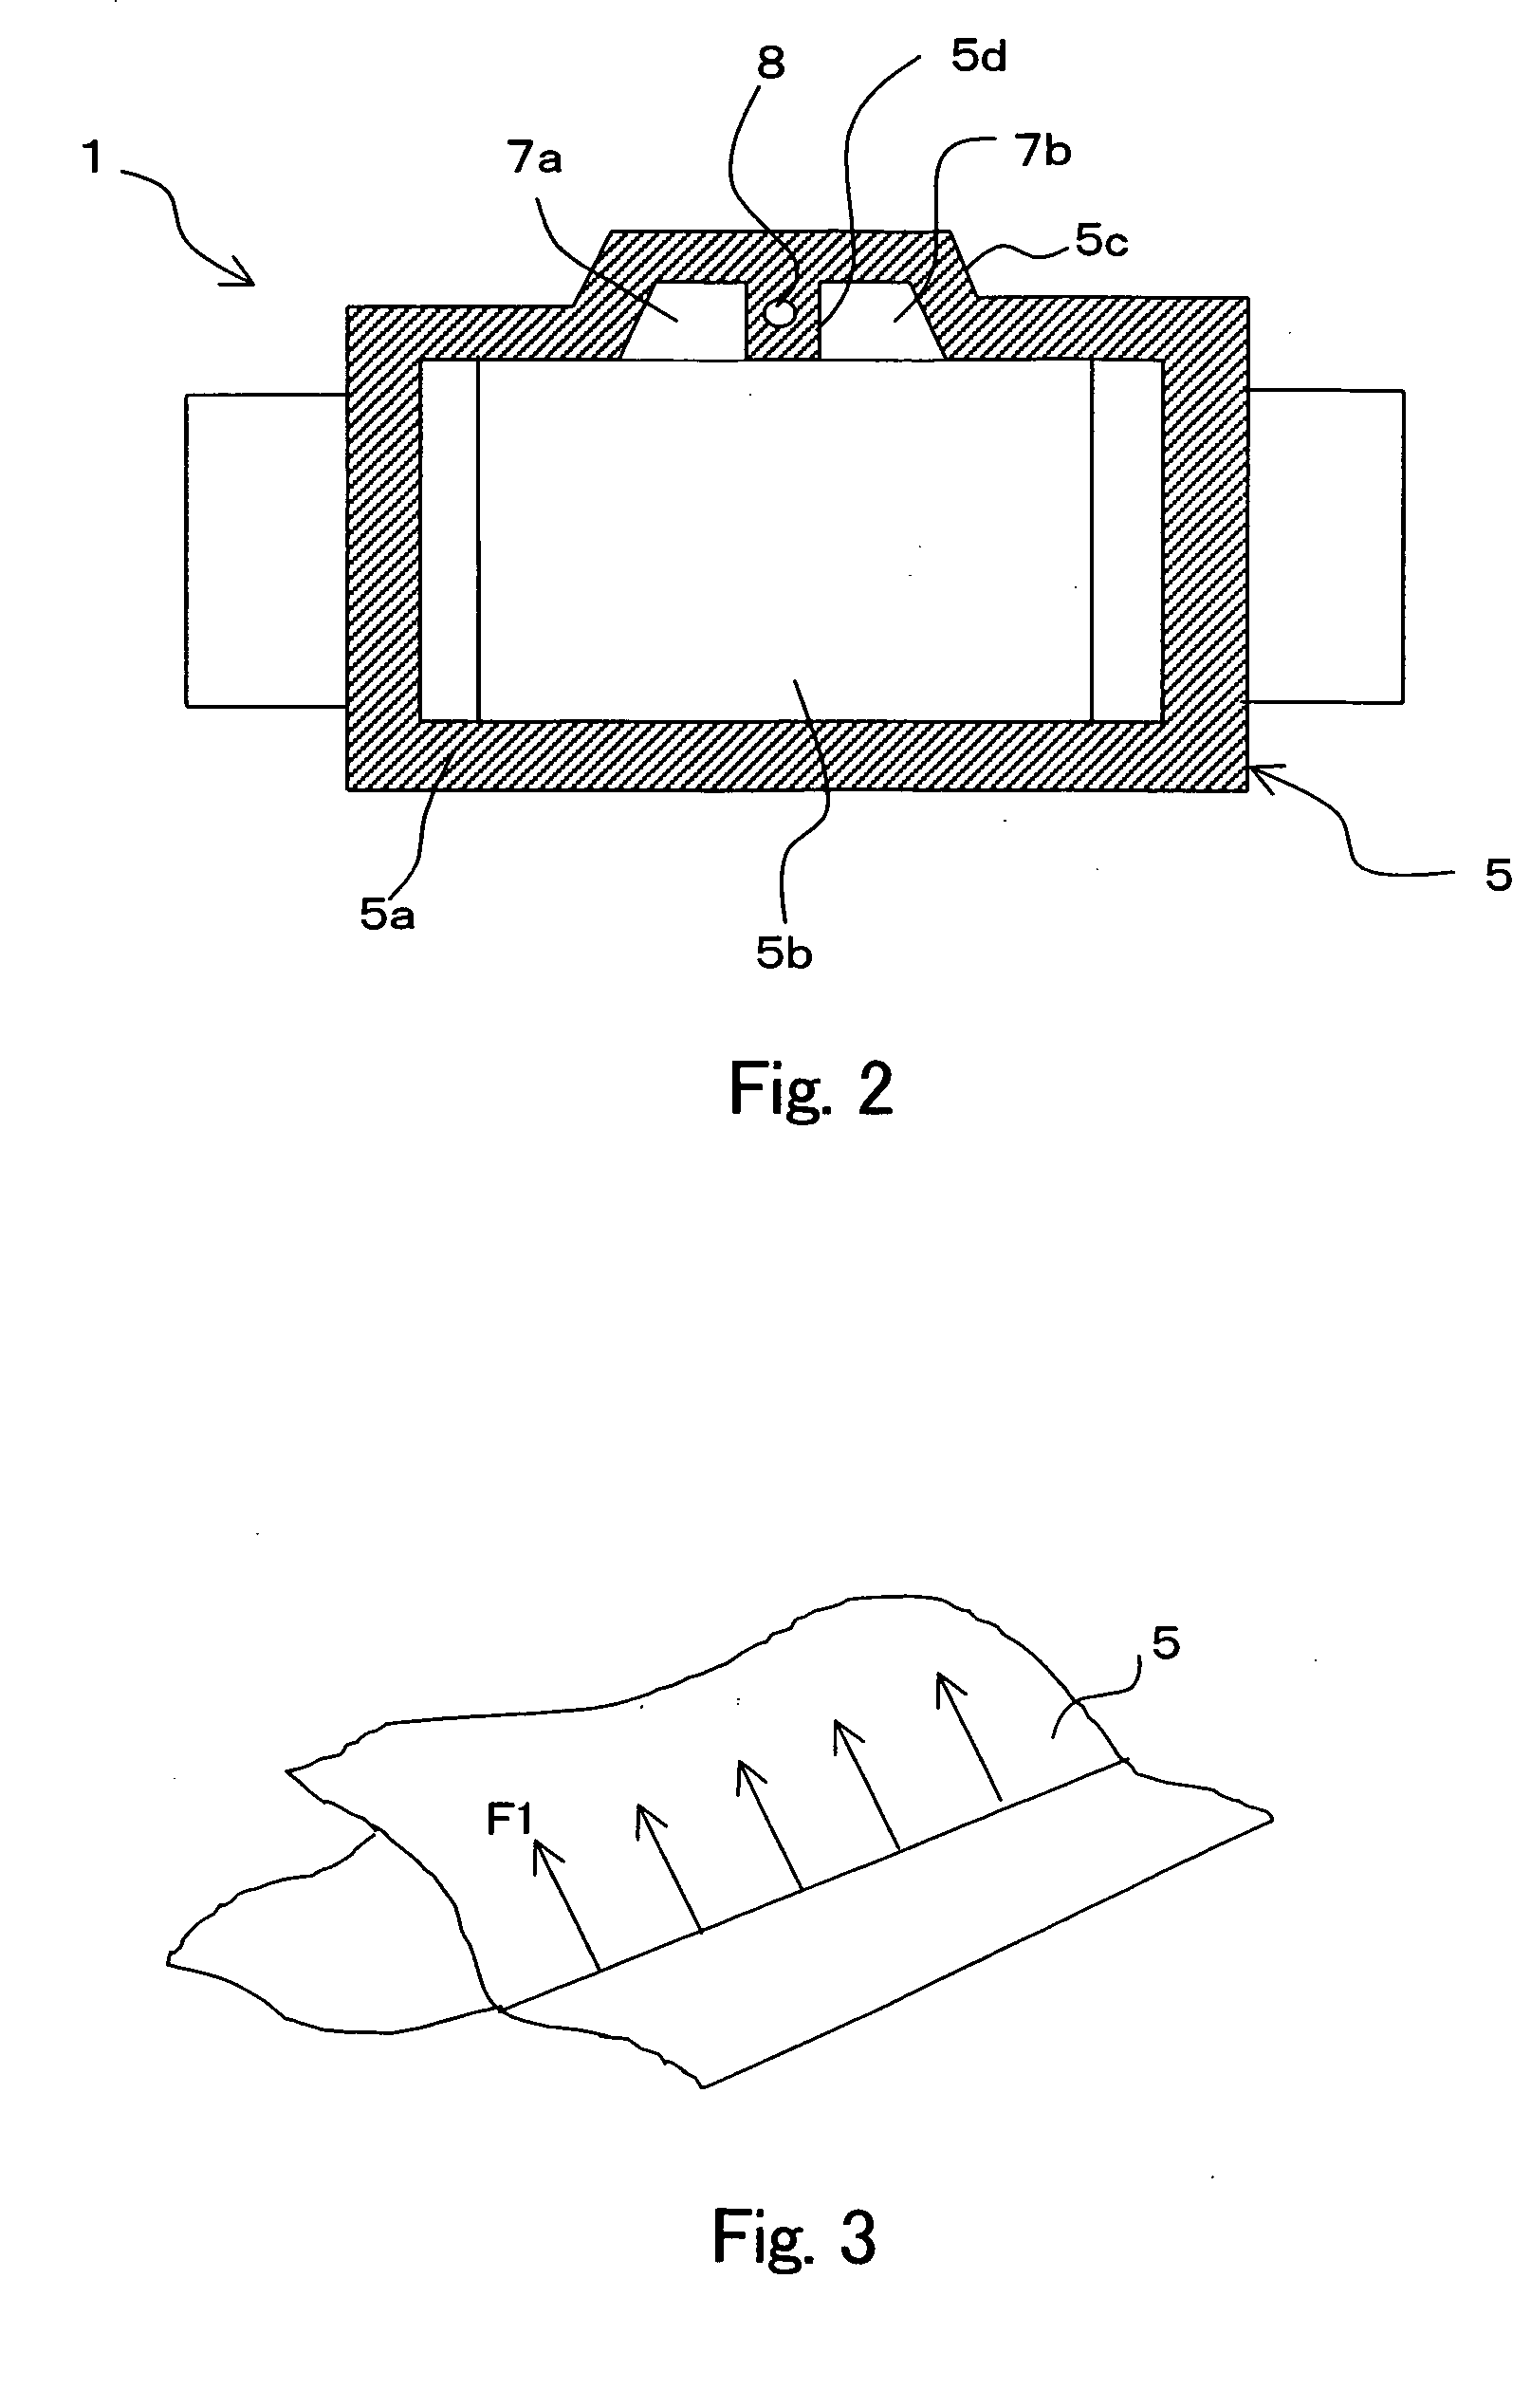 Film-covered electric device having pressure release opening